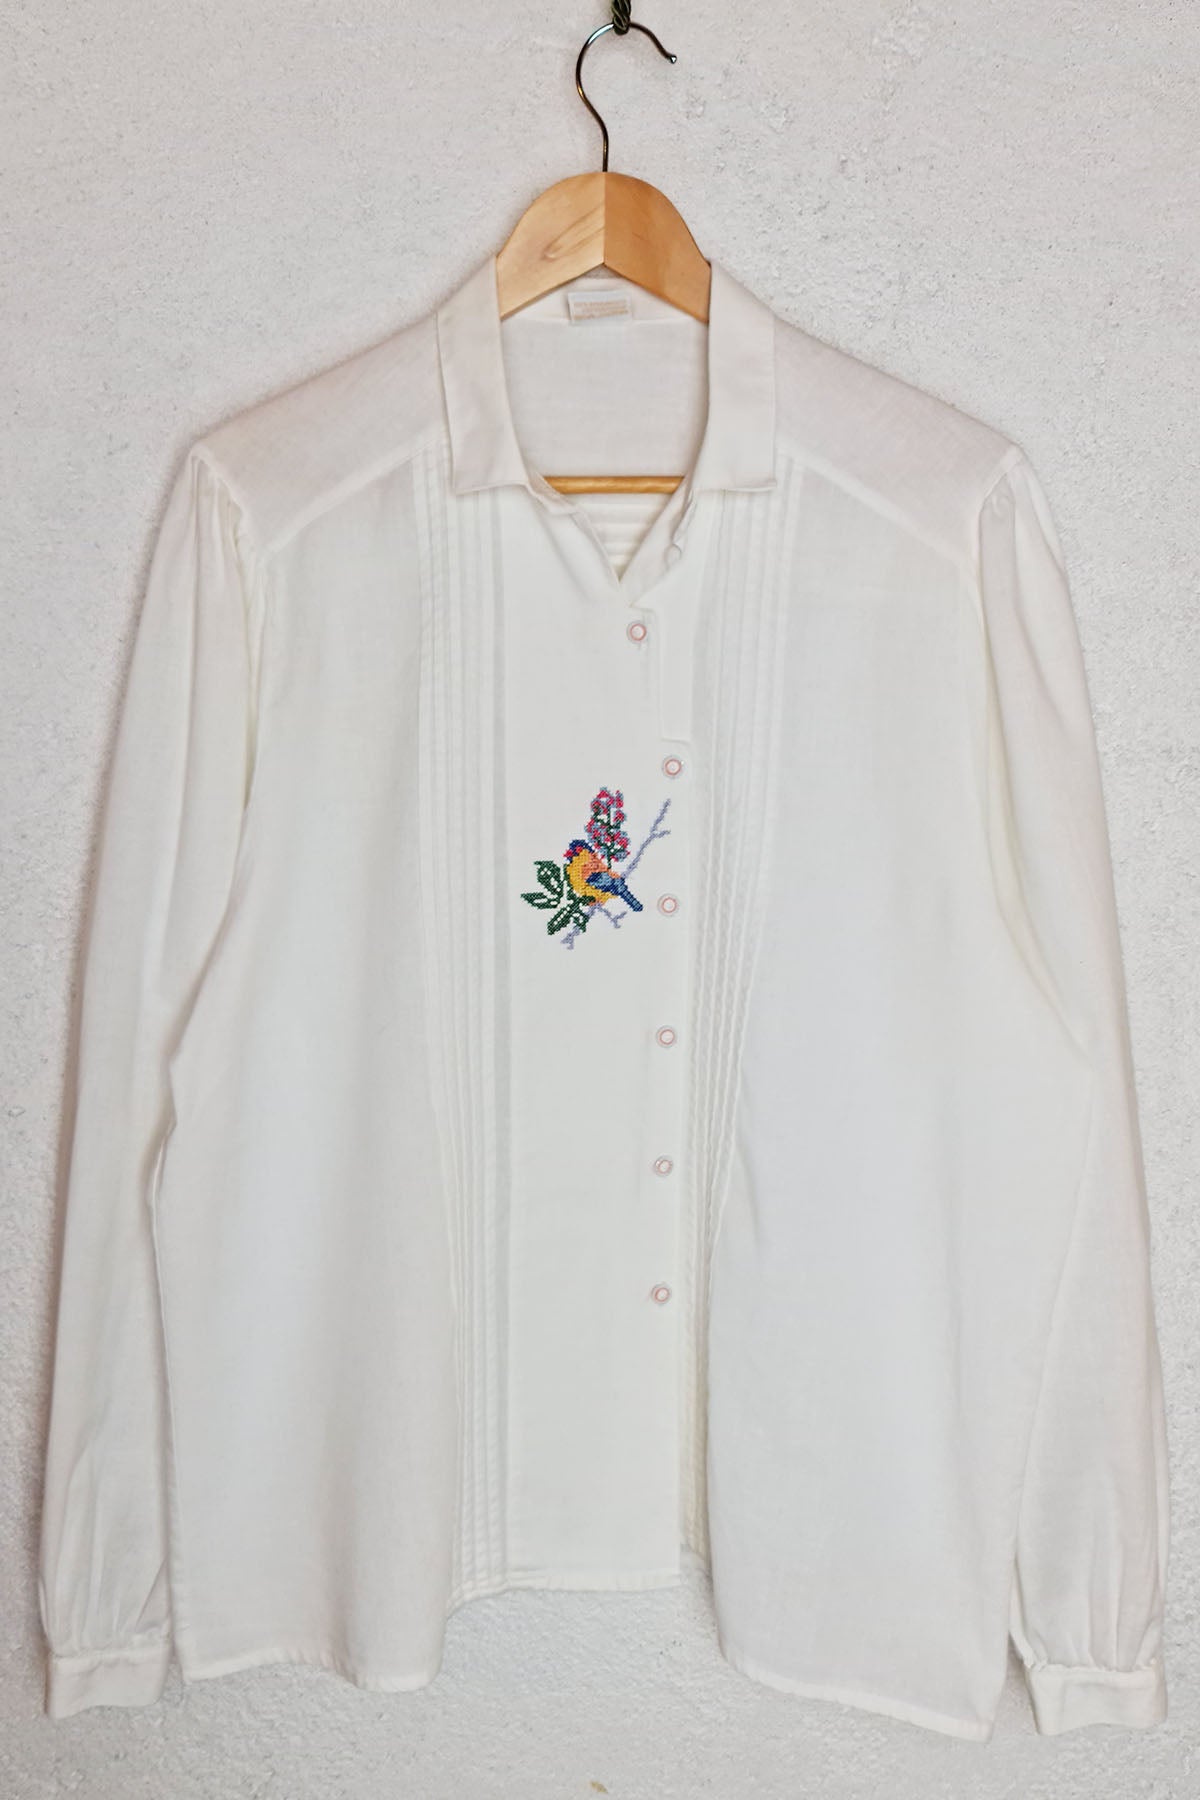 Cute Bird Embroidery Vintage Blouse